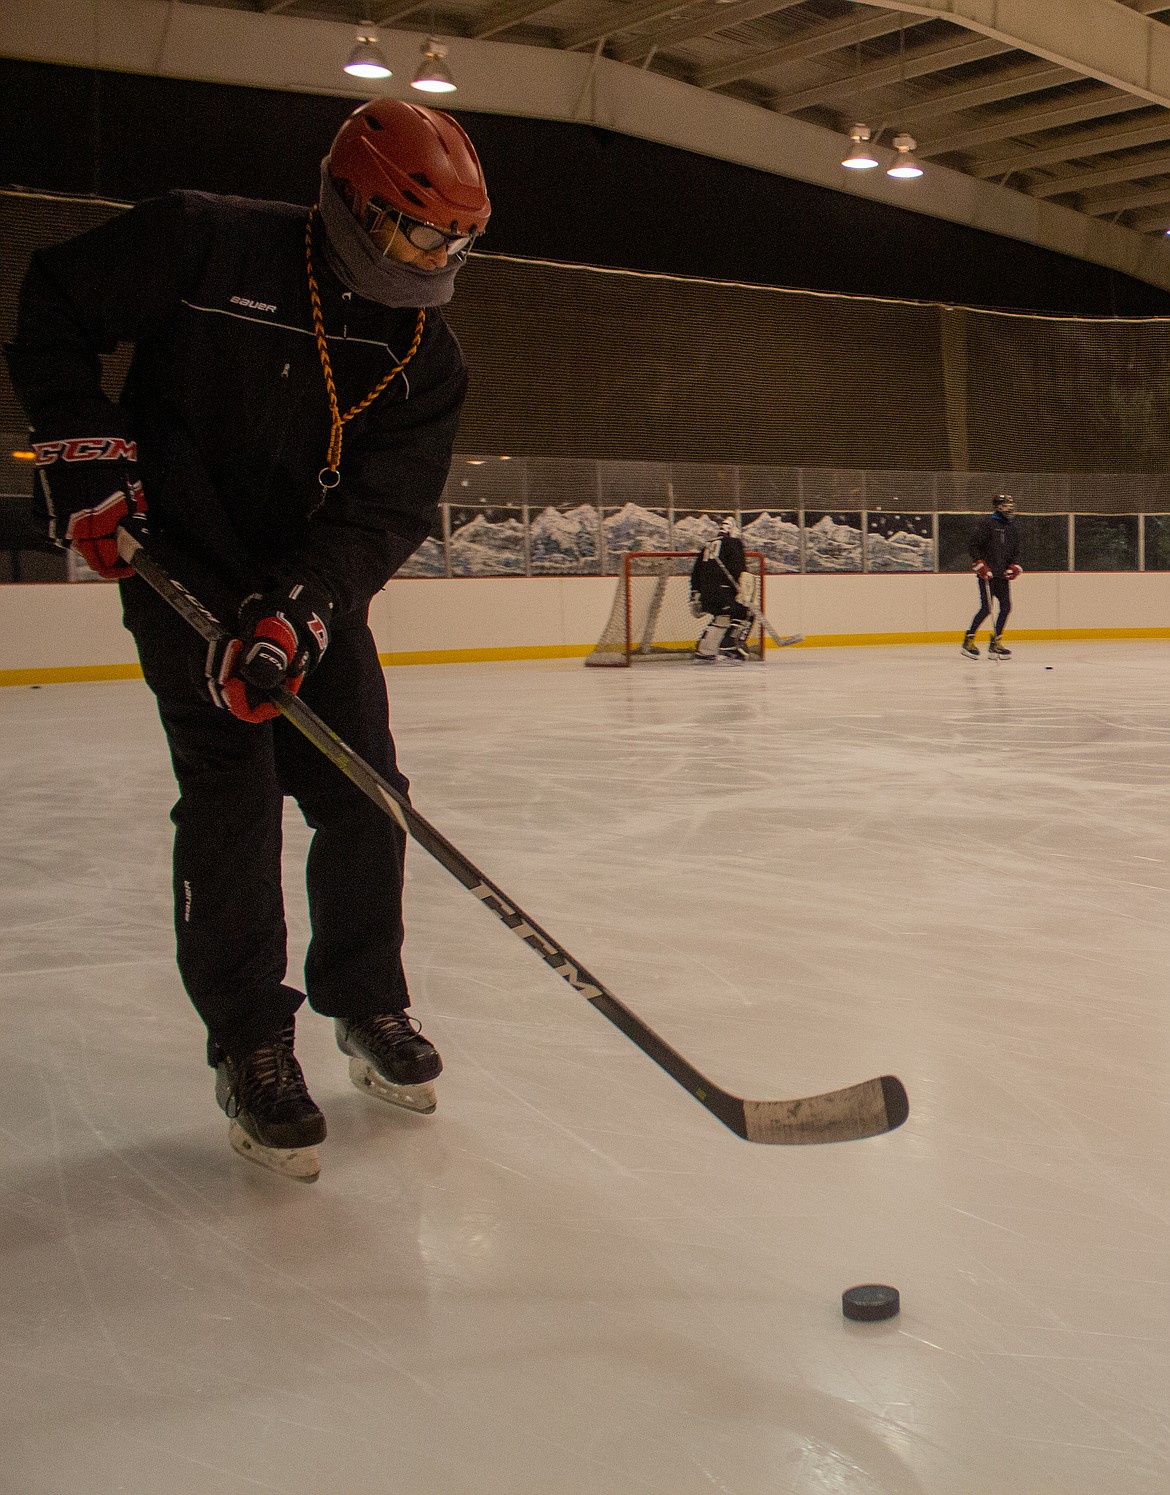 18U coach and MLYHA Hockey Director Chad Strevy works with his team on the ice as they get warmed up at the beginning of practice on Monday night.